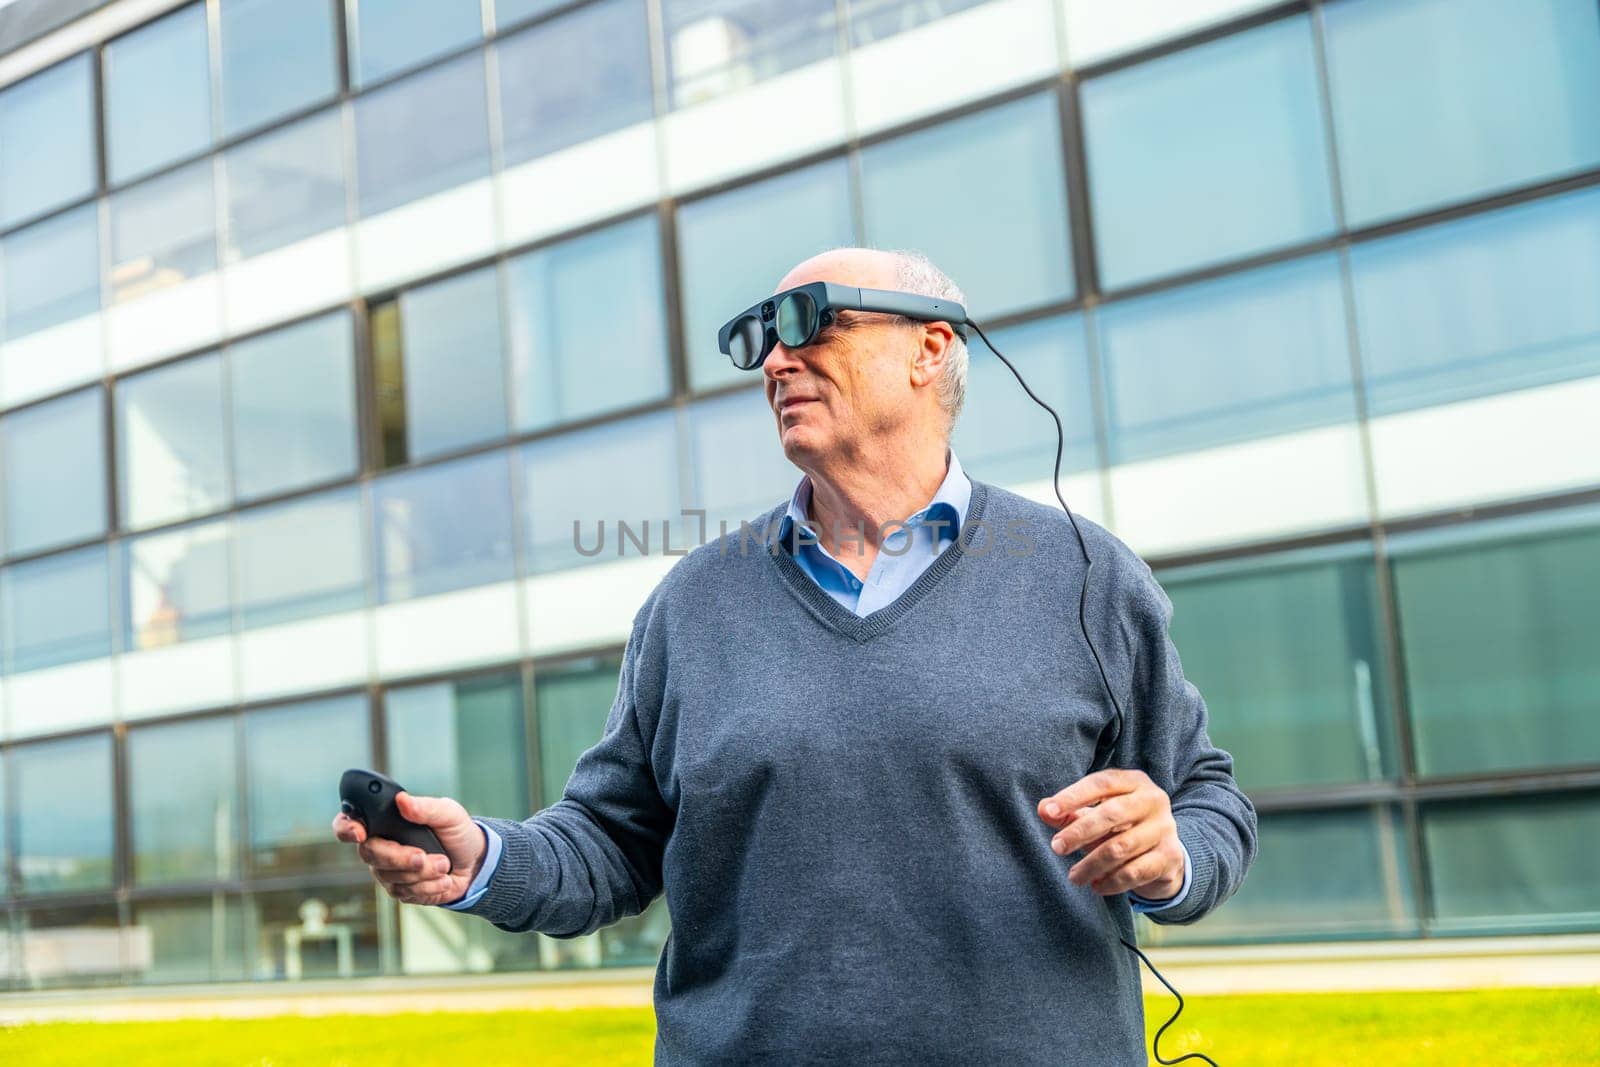 Horizontal photo with copy space of an aged man interacting with augmented vision goggles outside the office